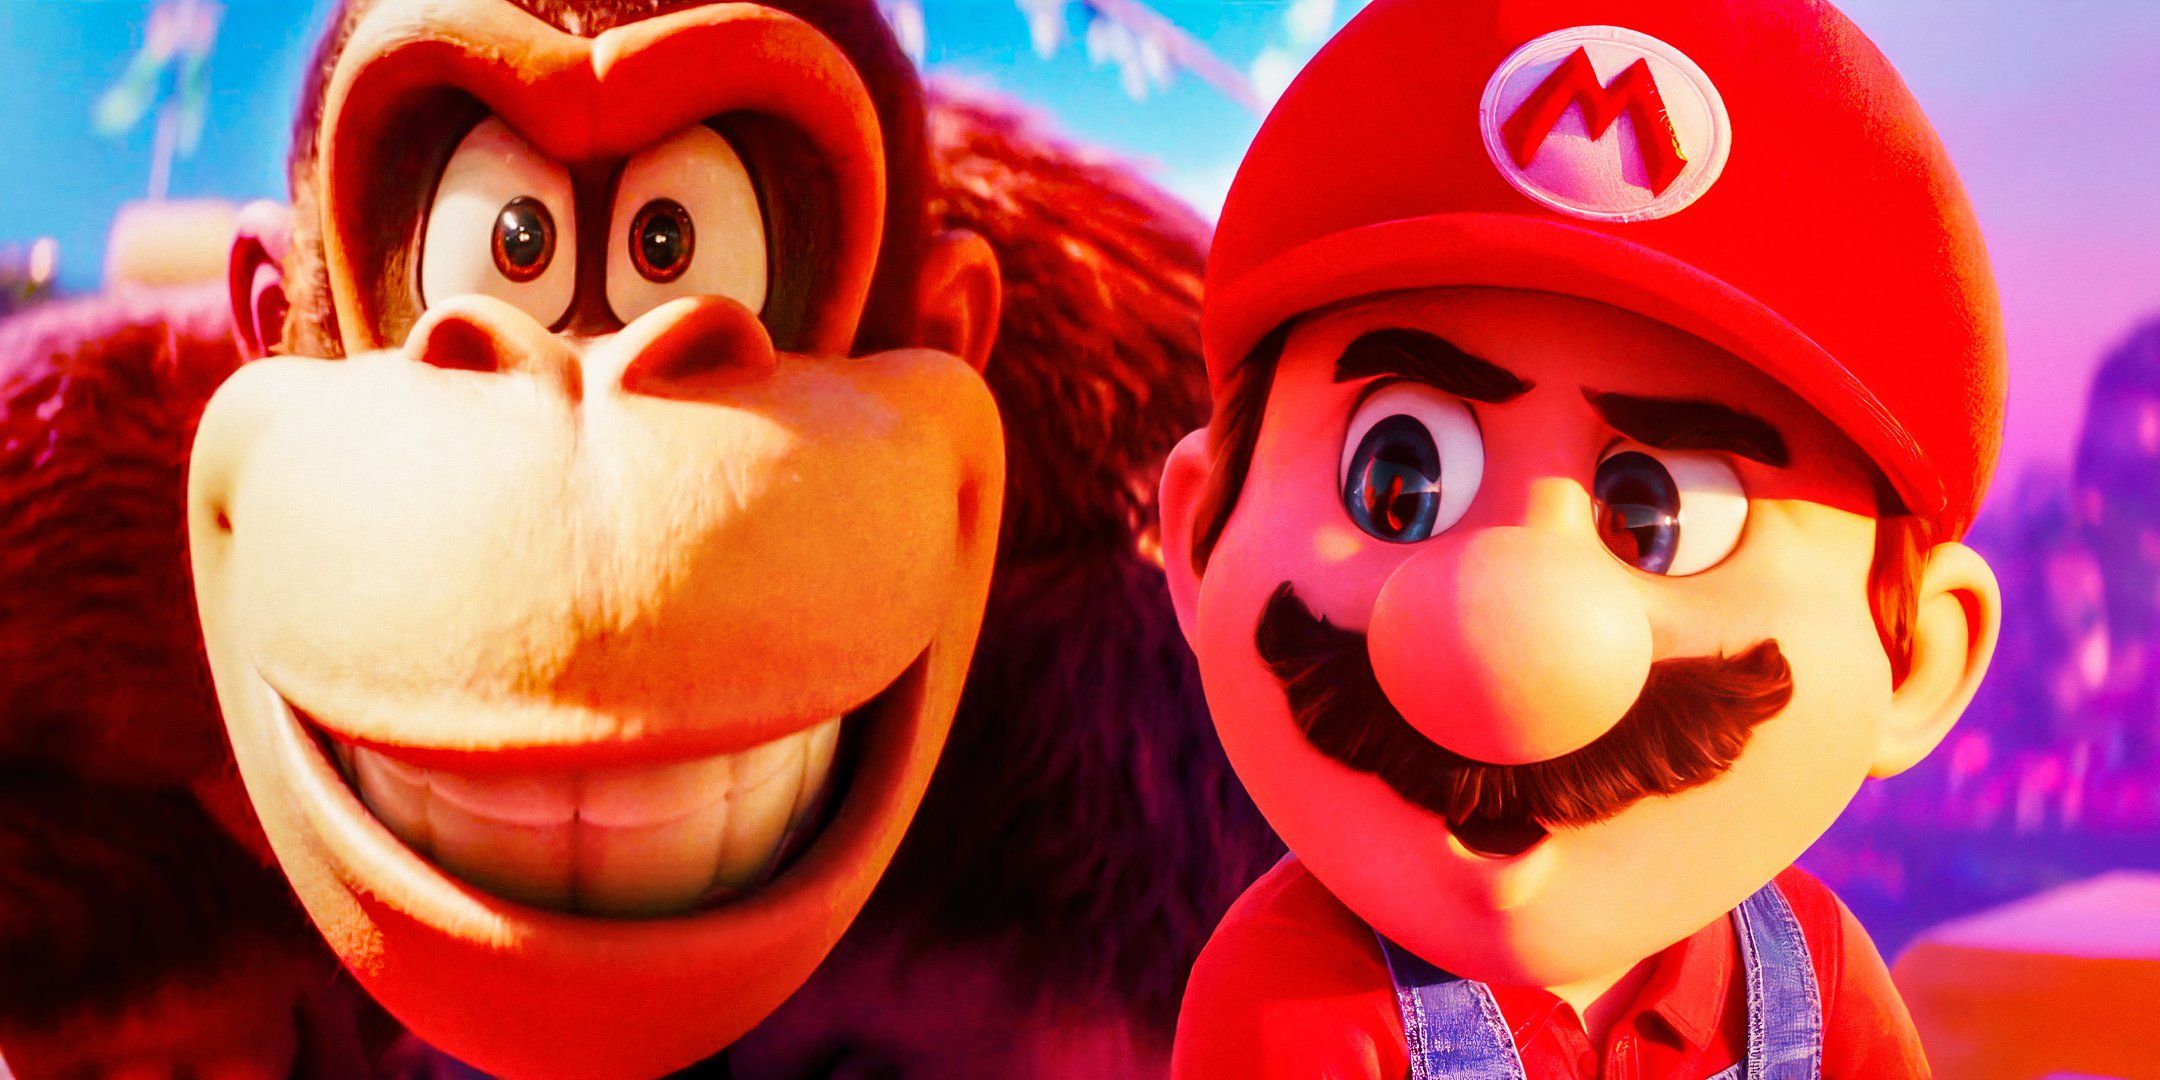 10 Character Team-Ups We Want To See In Super Mario Bros. 2